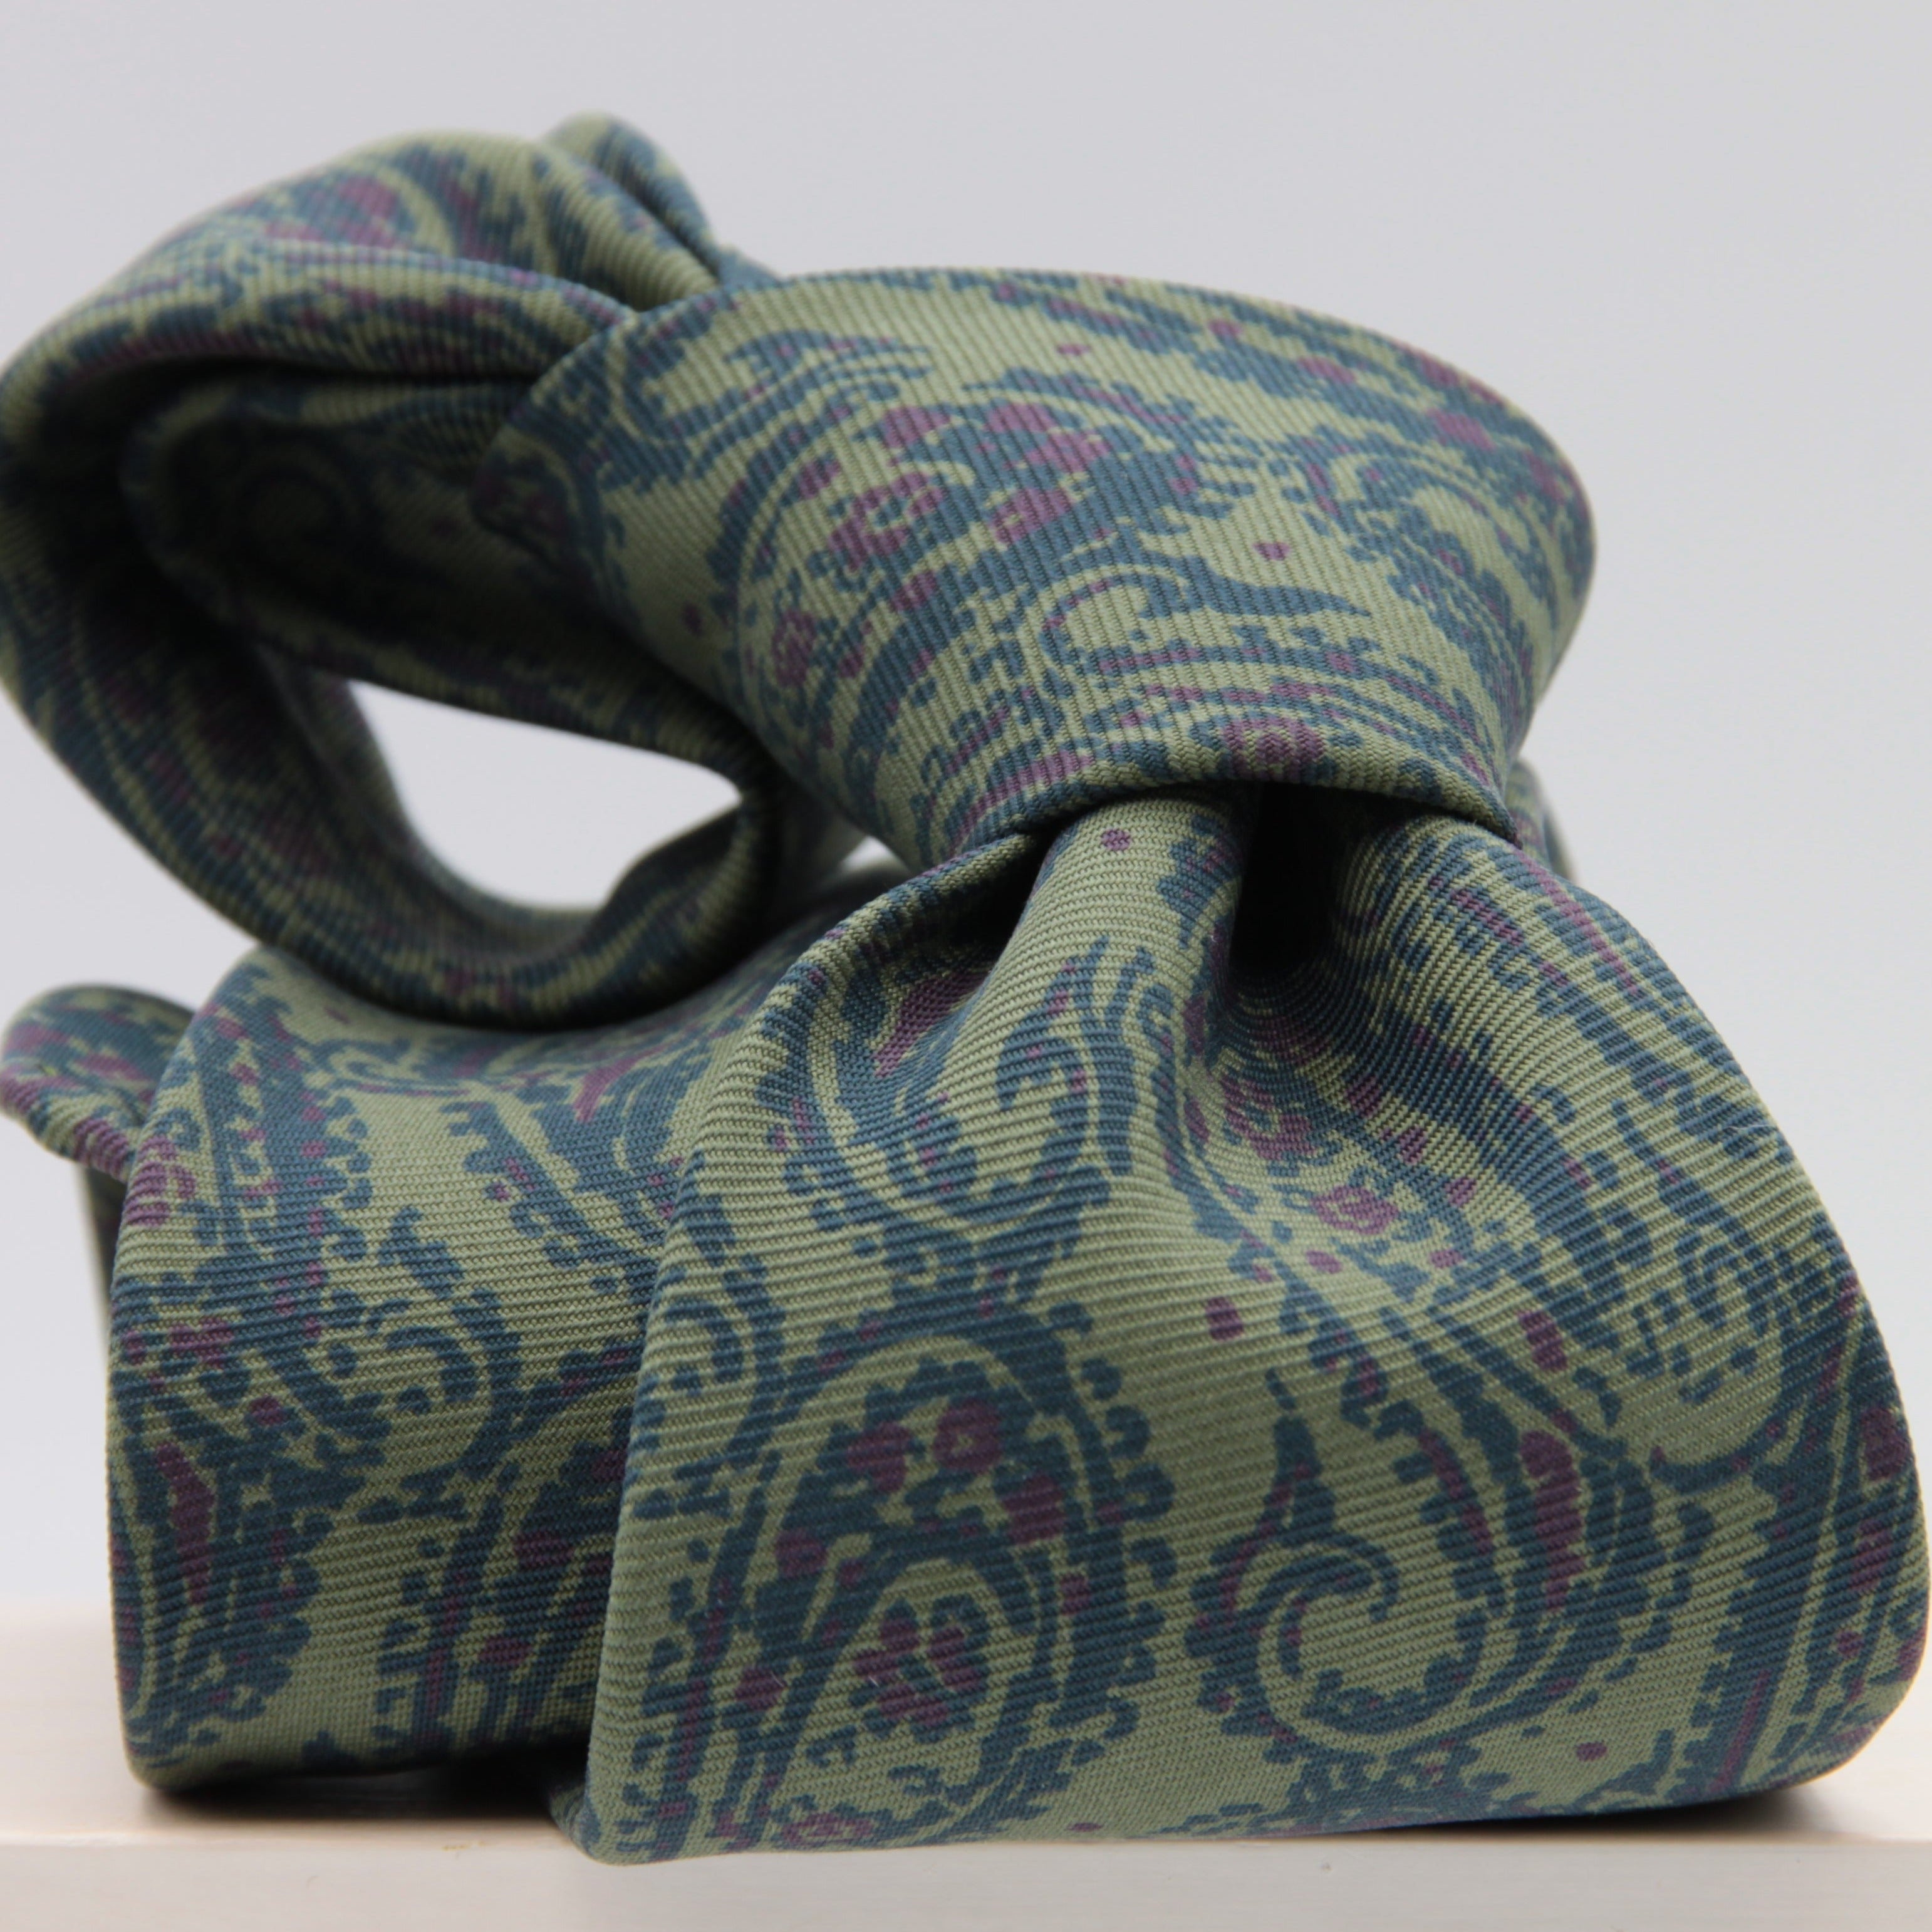 Holliday & Brown for Cruciani & Bella 100% printed Silk Unlined Seven Fold Green and Blue Paisley motif tie Handmade in Italy 8 cm x 150 cm #6952